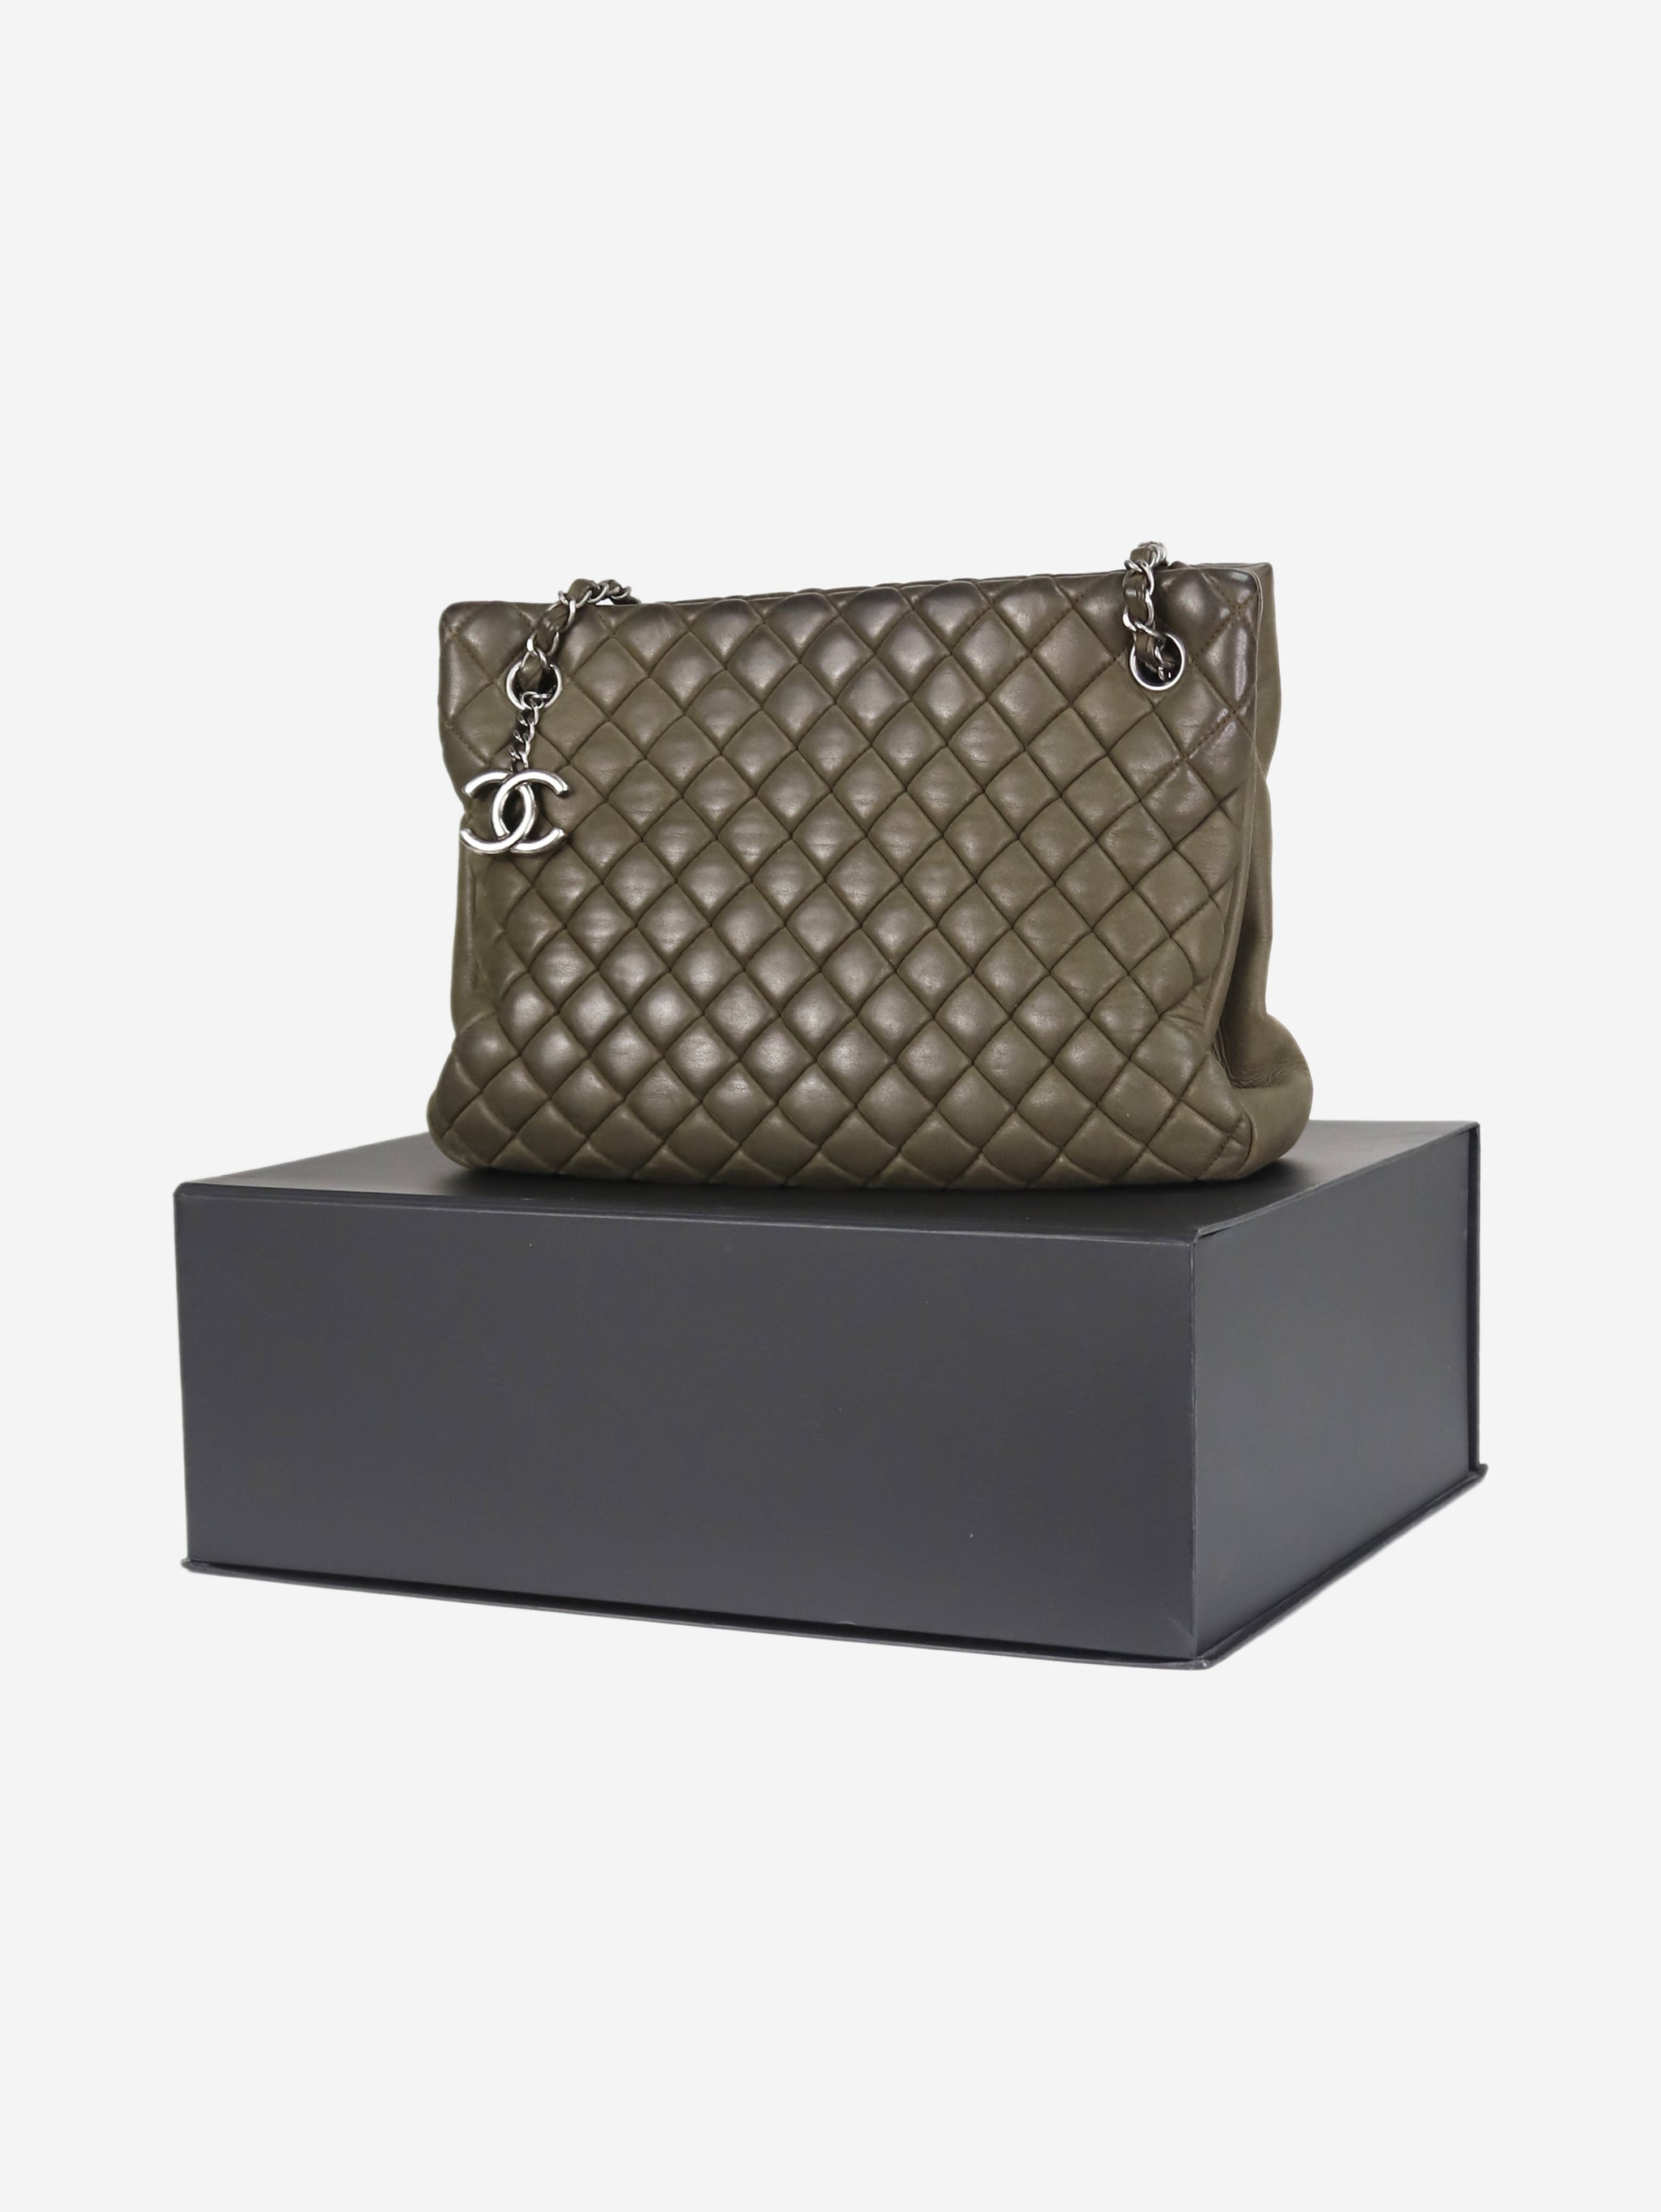 Green pre-owned Chanel quilted chain shoulder bag | Sign of the Times